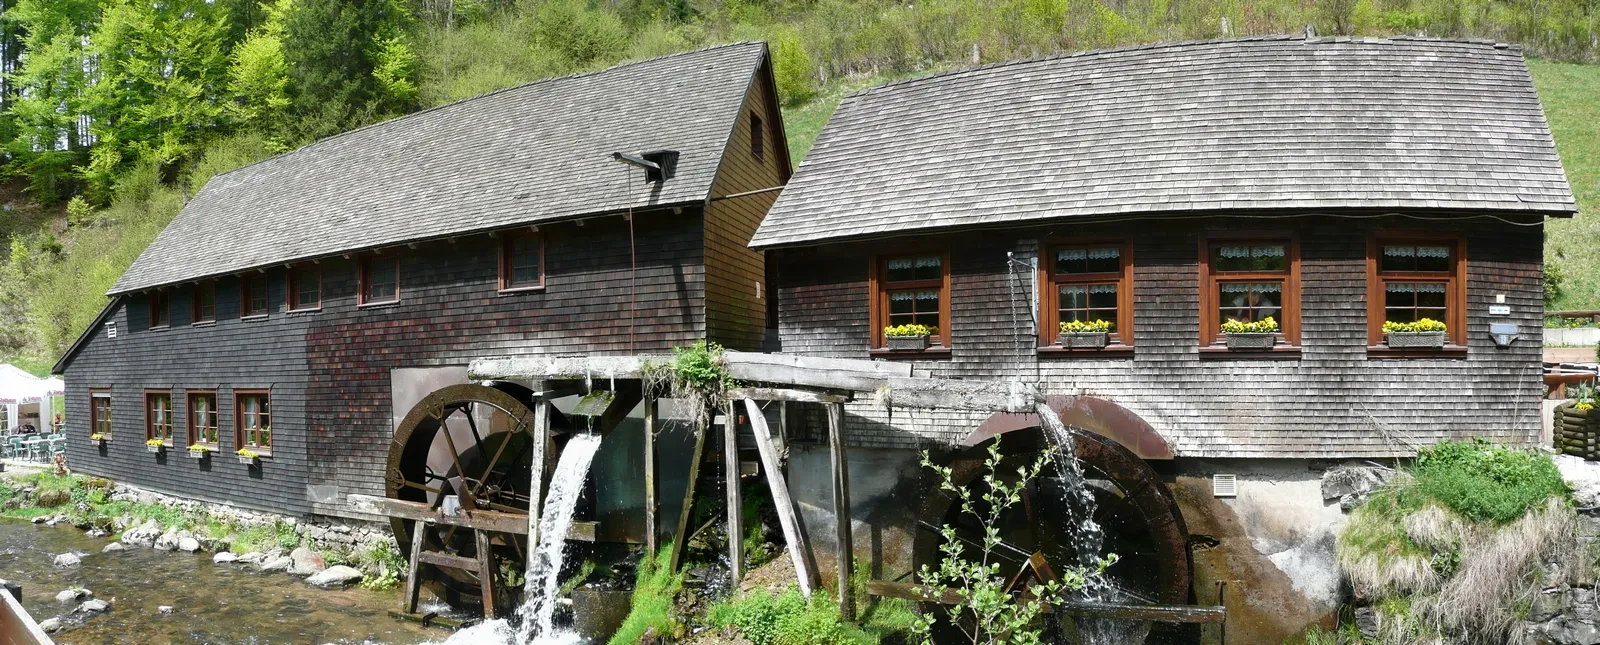 Photo showing: This image shows the Hexenloch mill in Furtwangen-Neukirch in the black forest. The mill was built 1825 and has been in operation ever since. Power output: 13 hp